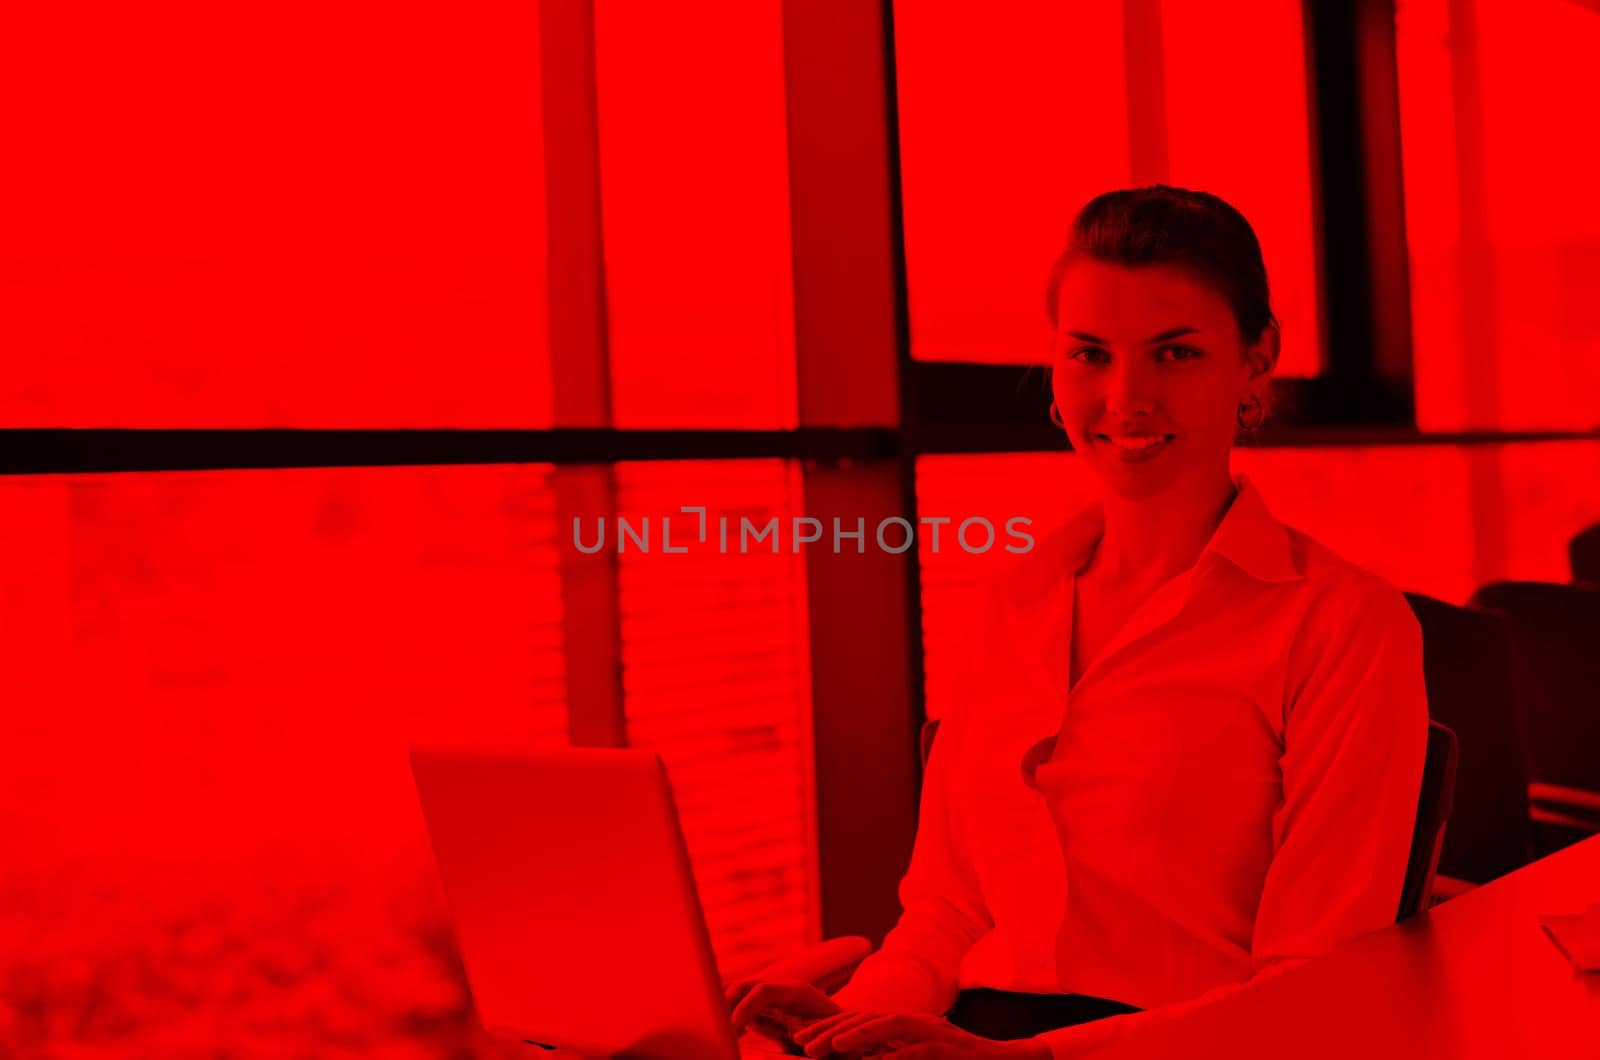 Young pretty business woman with notebook in the bright modern office indoors